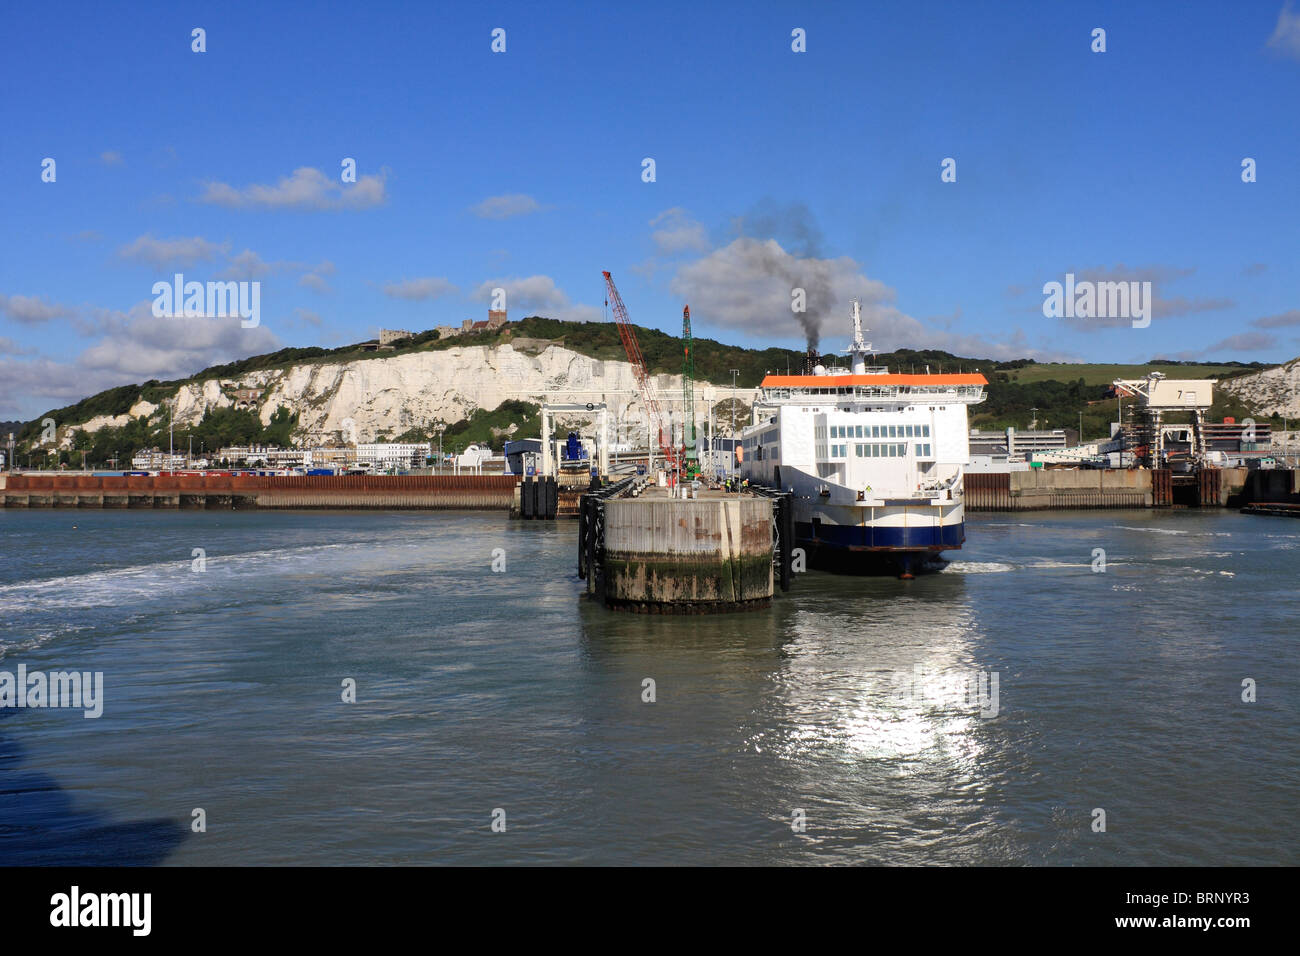 Views of the coastline of Dover the ferry port and the English Channel from Sea France passenger ferry, Summer 2010. Stock Photo